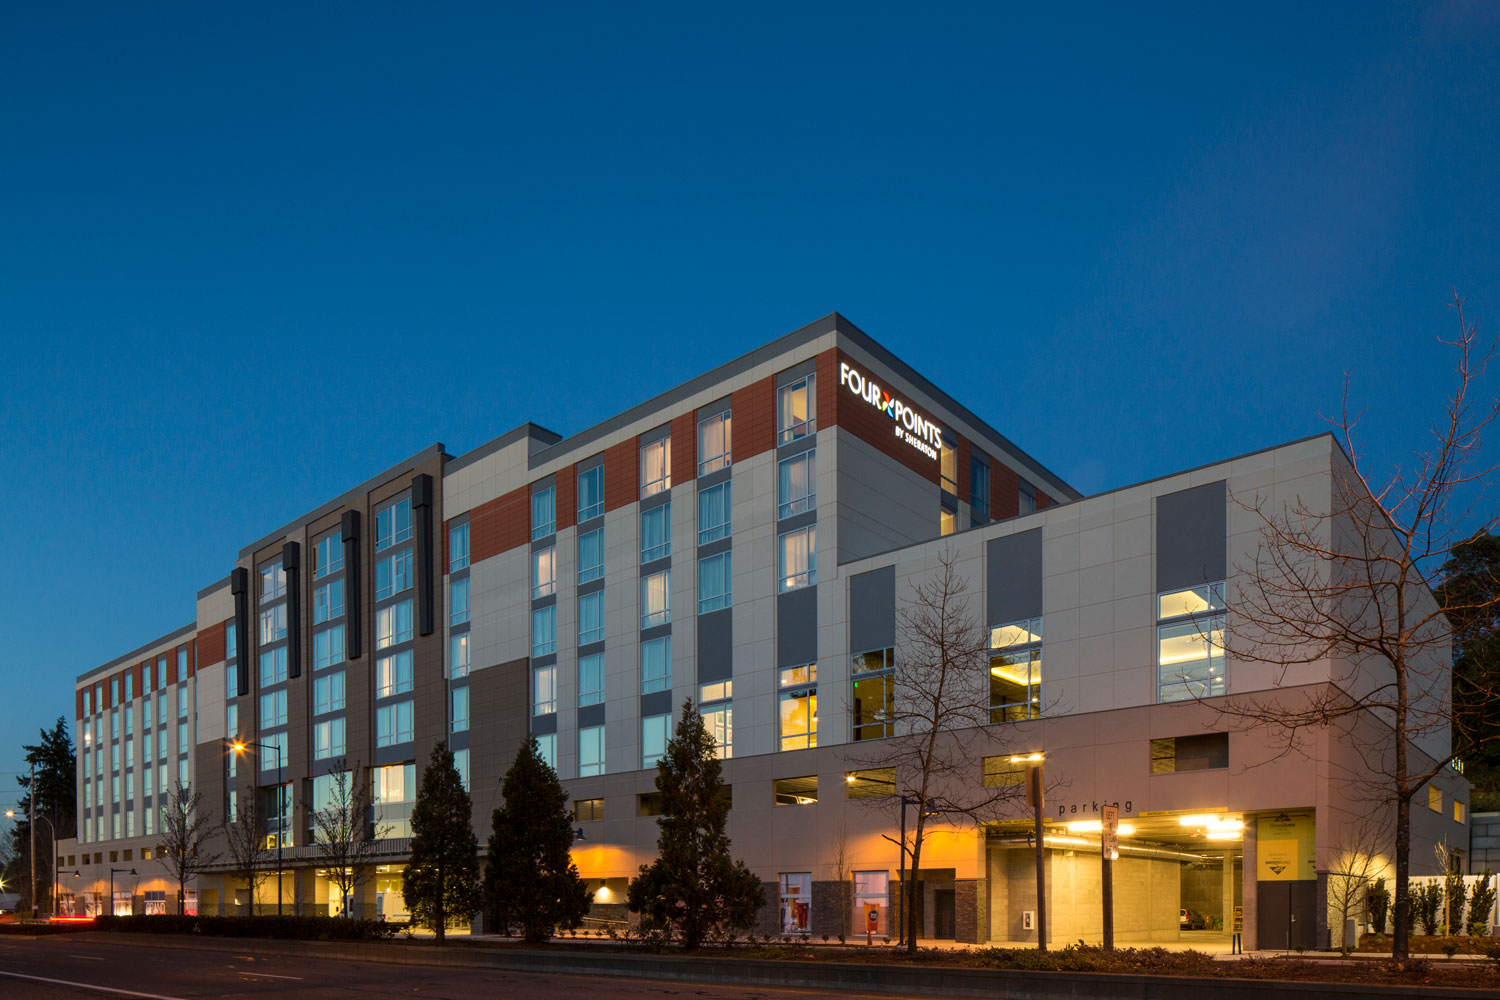 Four Points by Sheraton Seattle Airport South Hotel